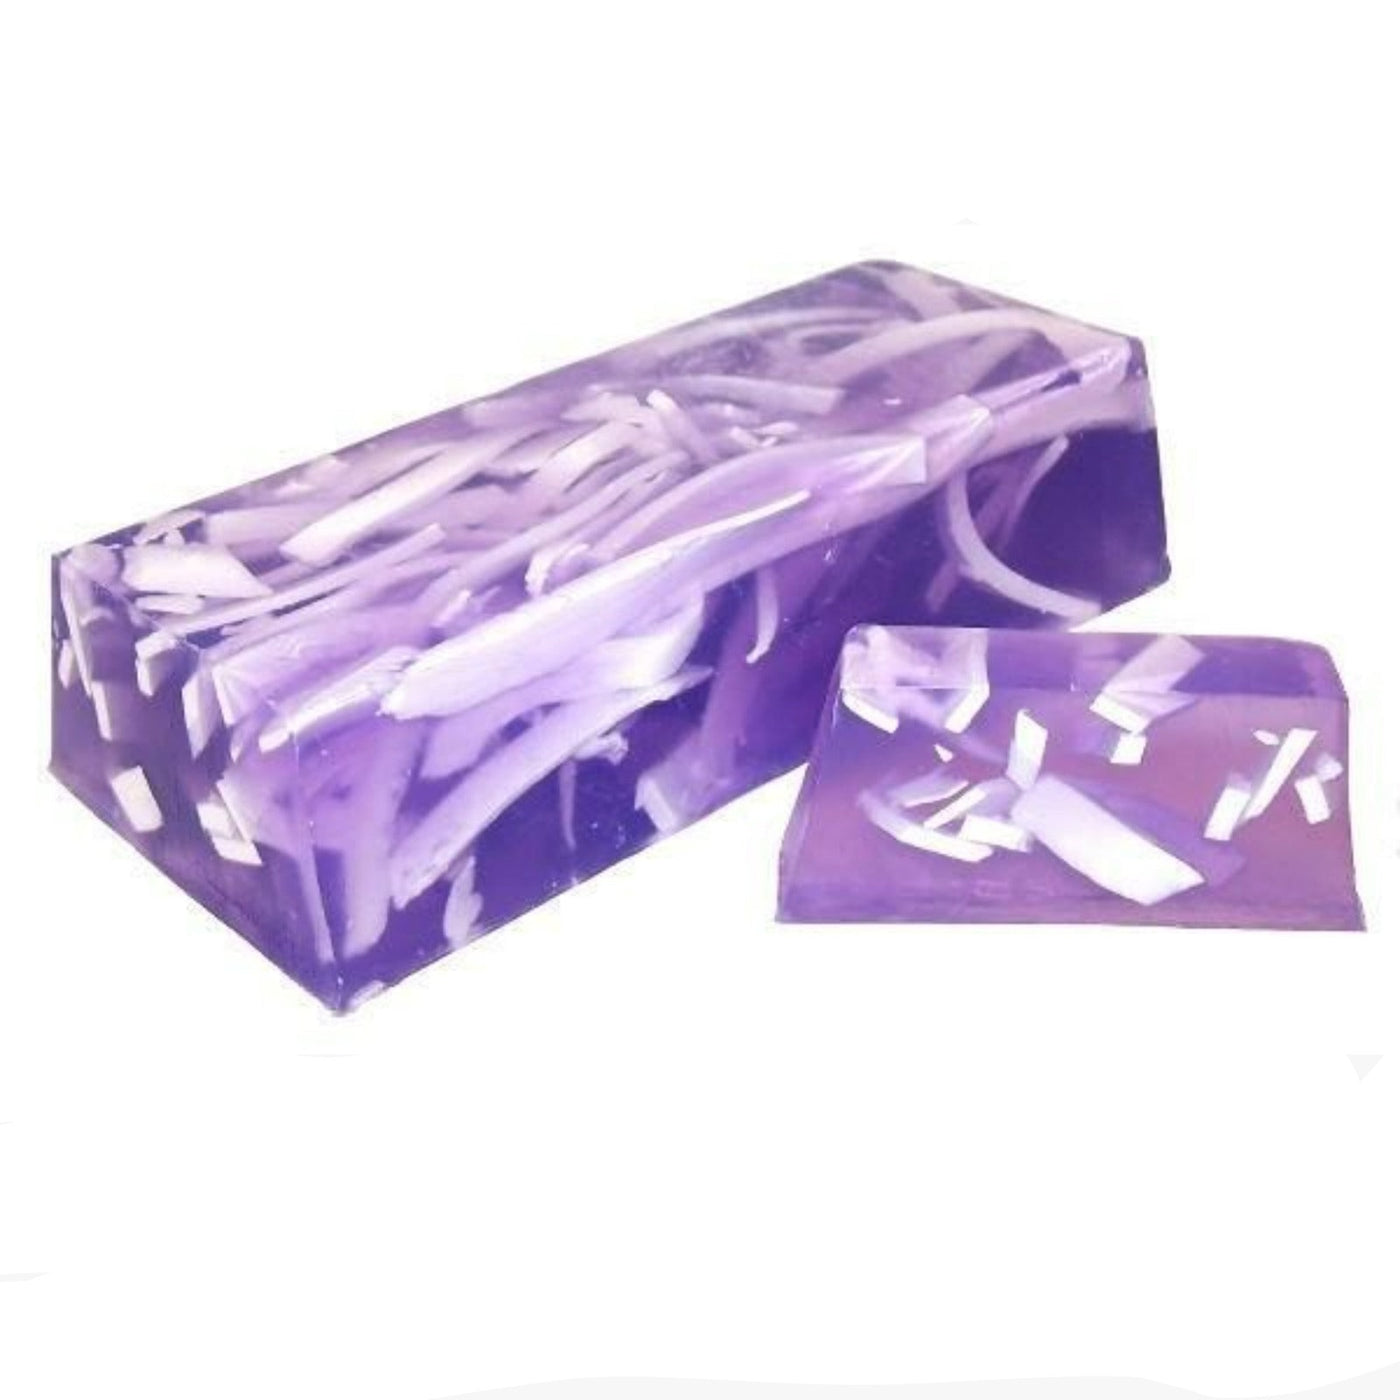 Texas Handcrafted Juicy Summer Purple Dewberry Body Soap Loaf.